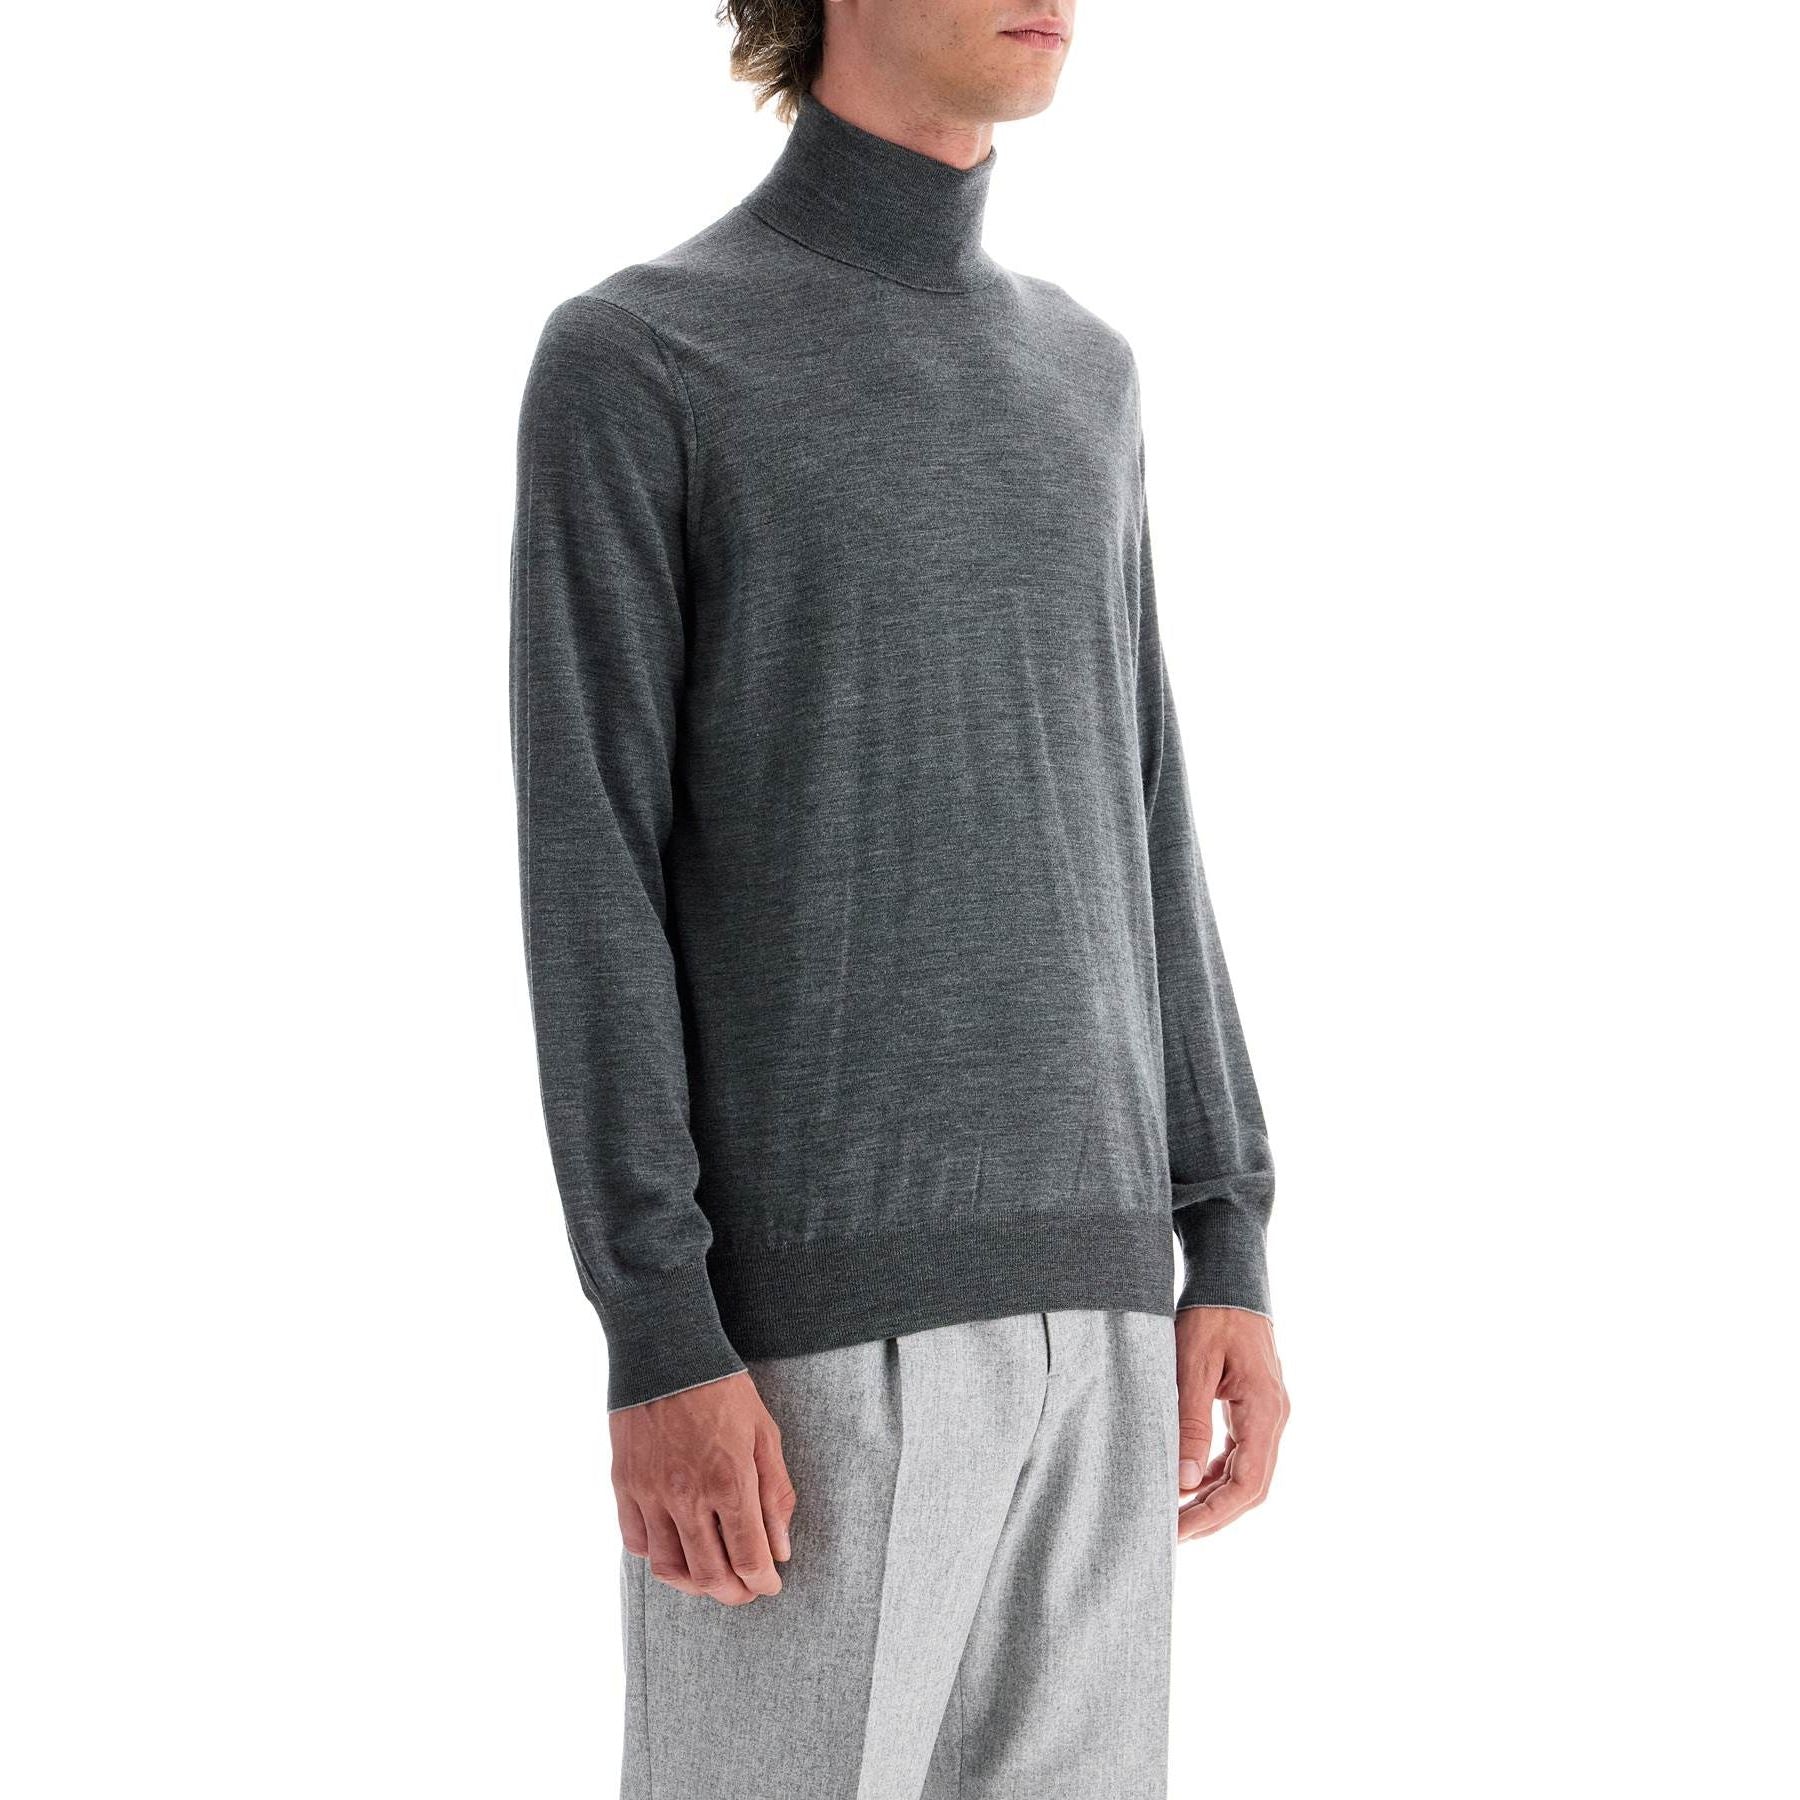 Lightweight Wool and Cashmere Turtleneck Sweater